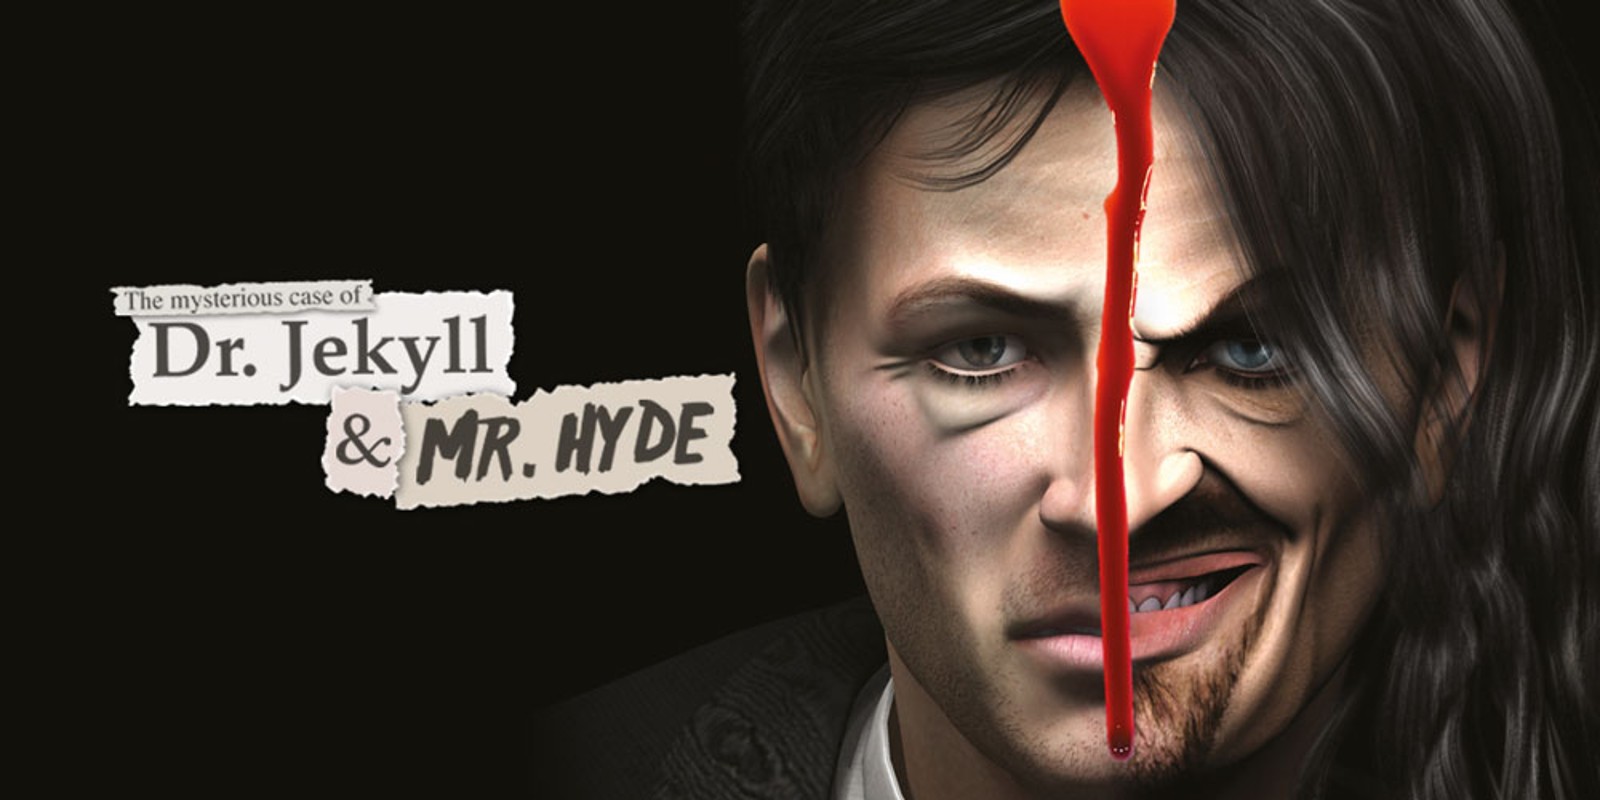 The Mysterious Case of Dr. Jekyll & Mr. Hyde